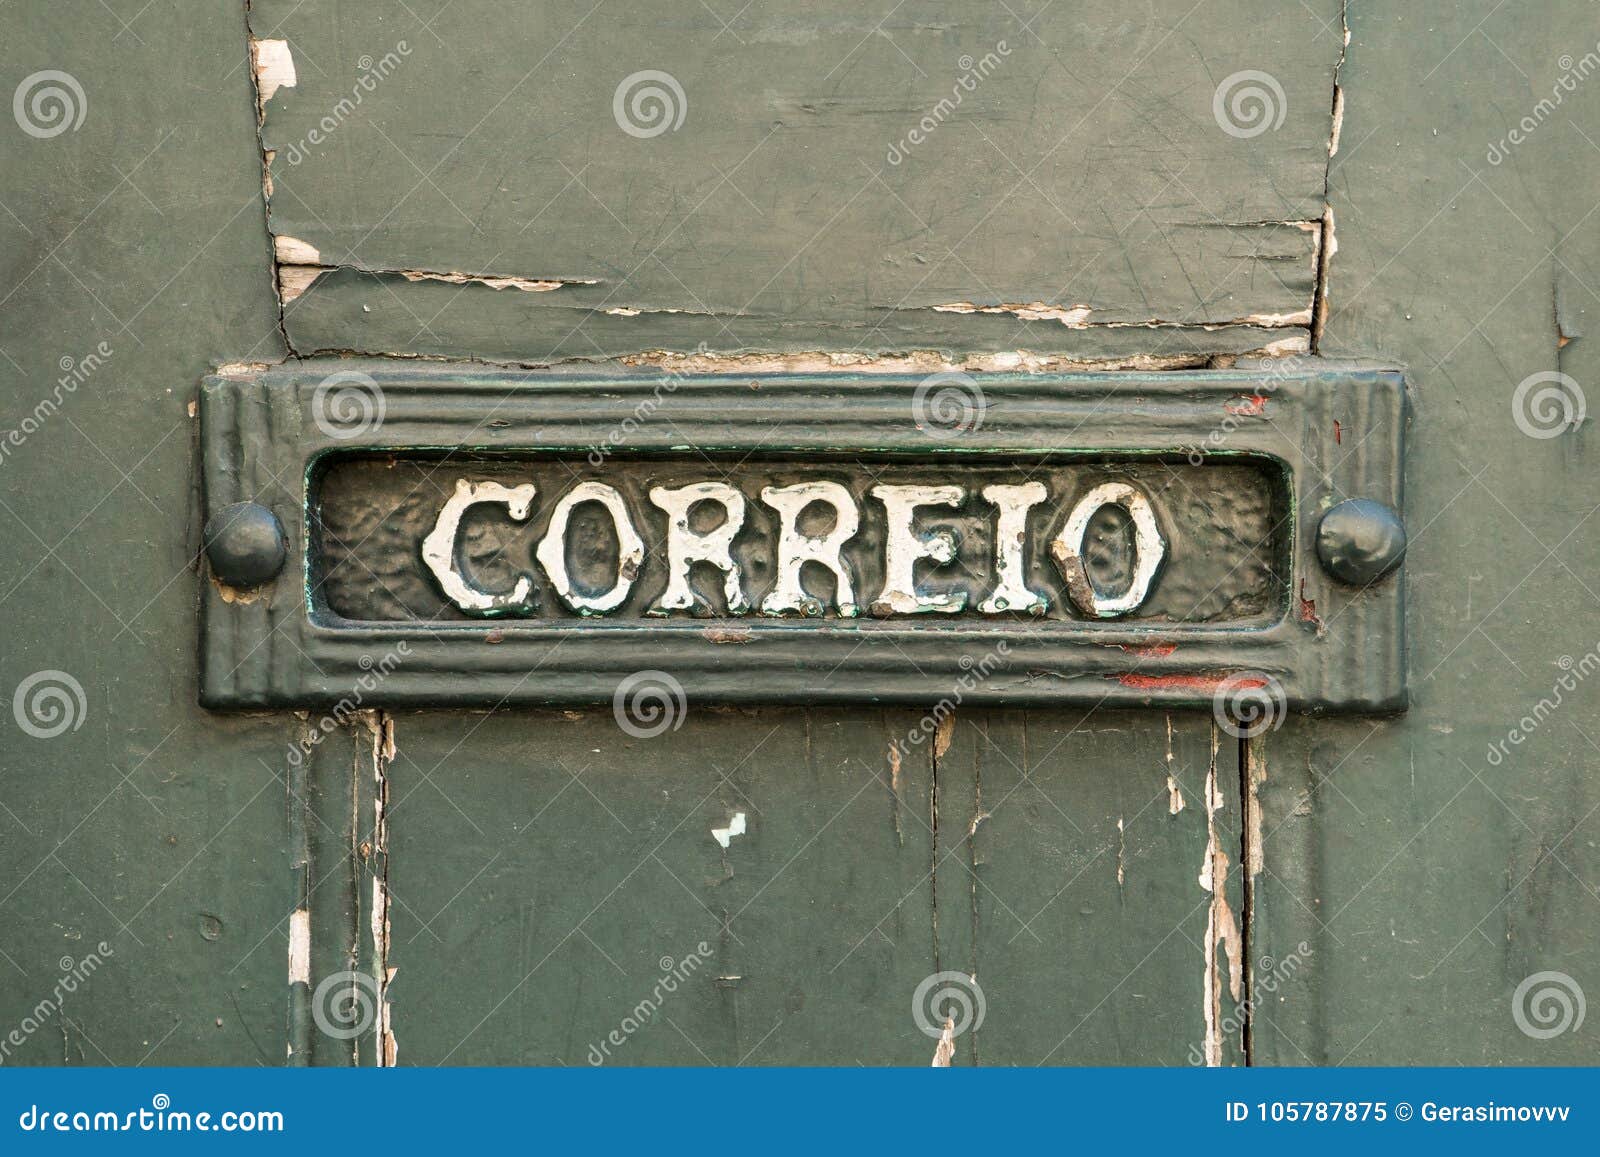 old rusty mailbox with the word correio